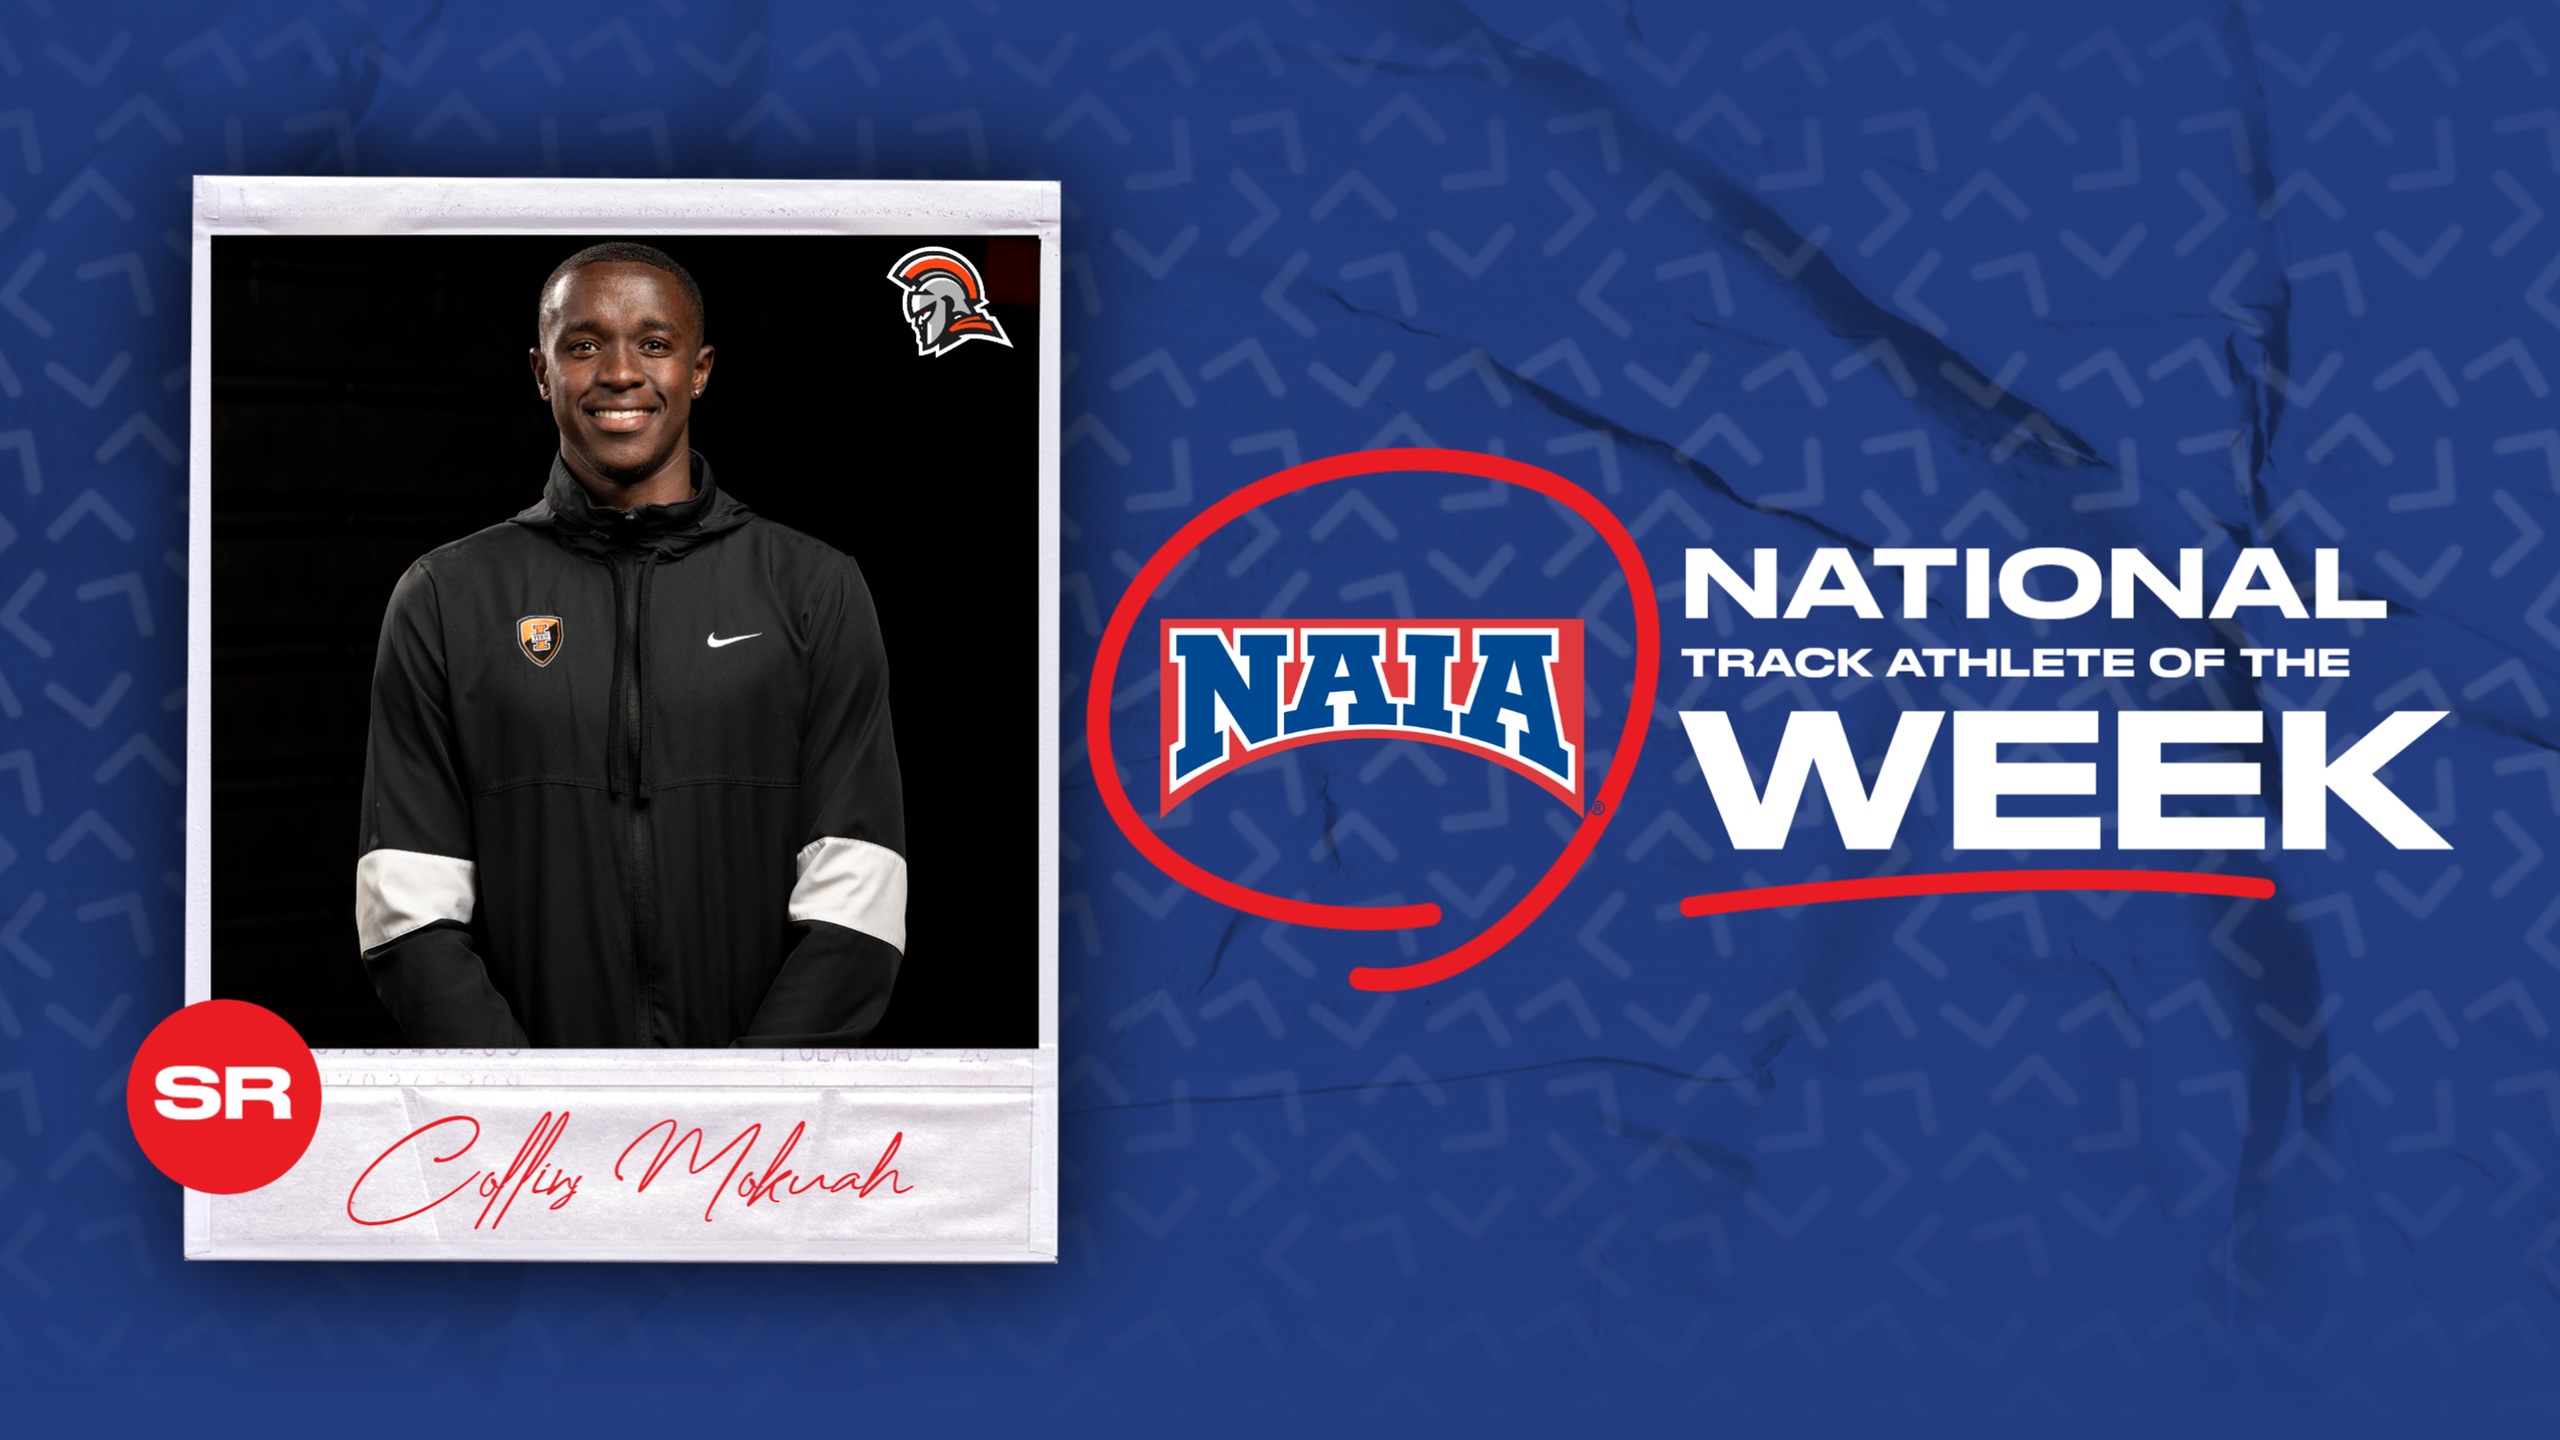 Indiana Tech's Mokuah named NAIA National Track Athlete of the Week